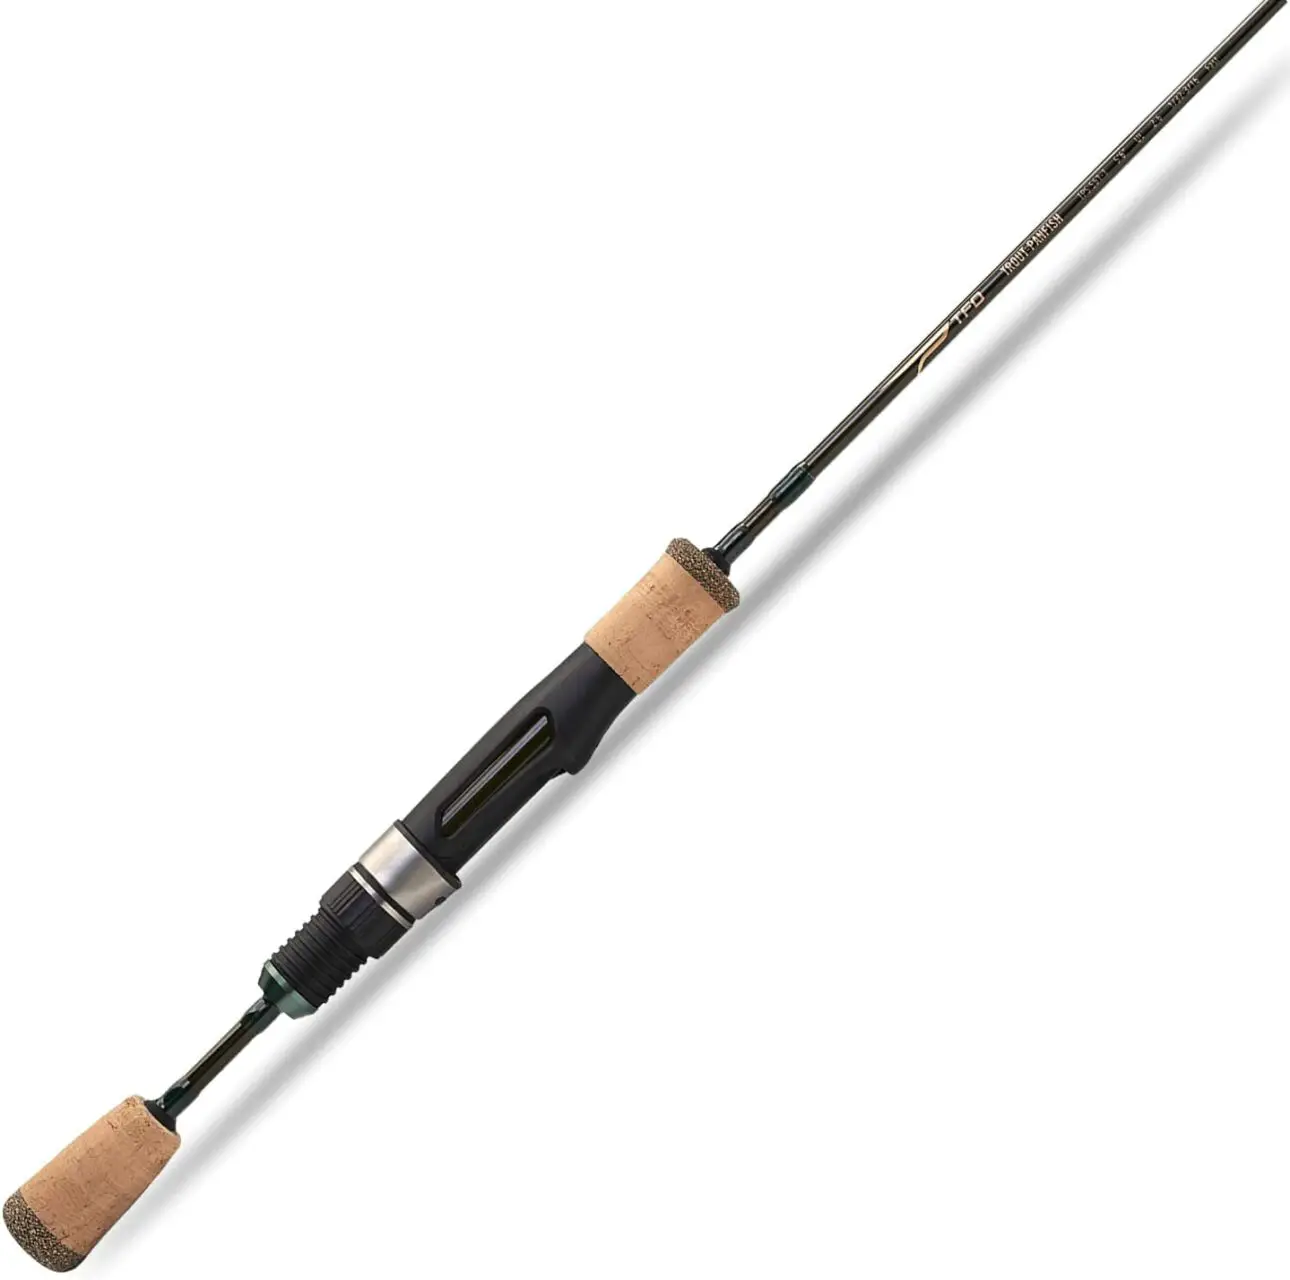 Temple Fork Outfitters (TFO) Trout Fishing Pole